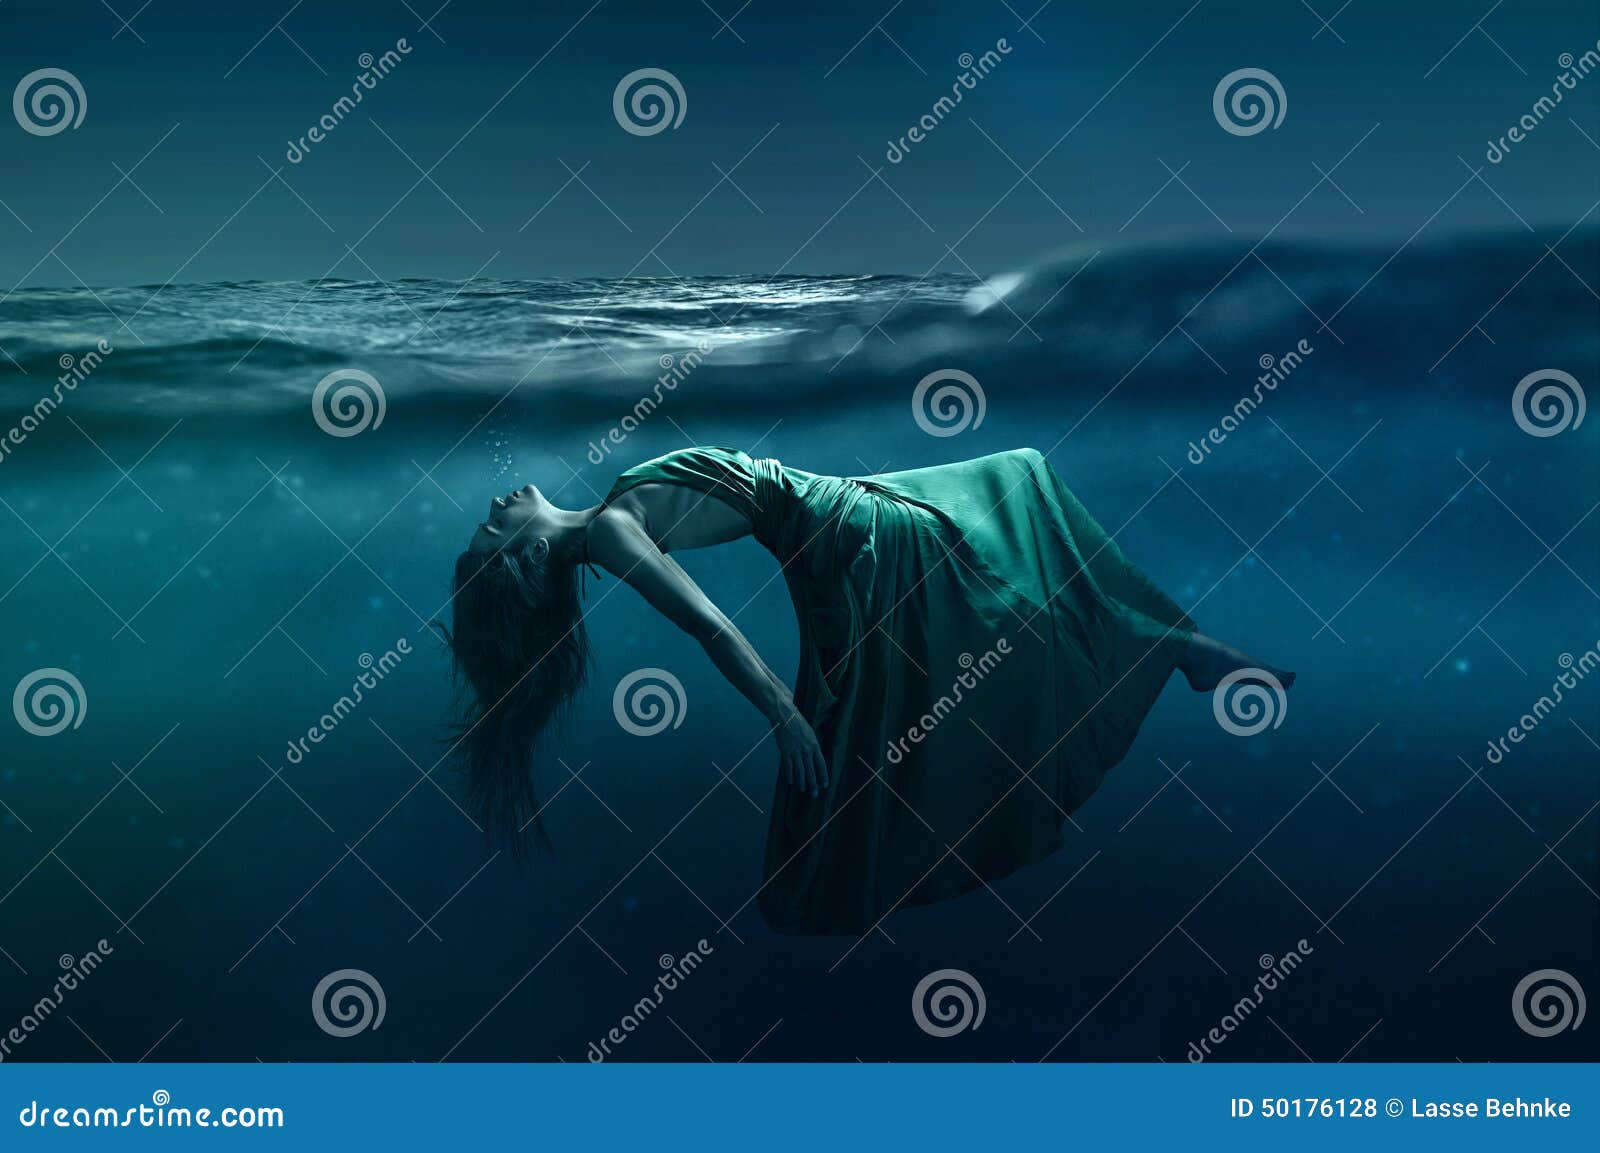 woman floating under water